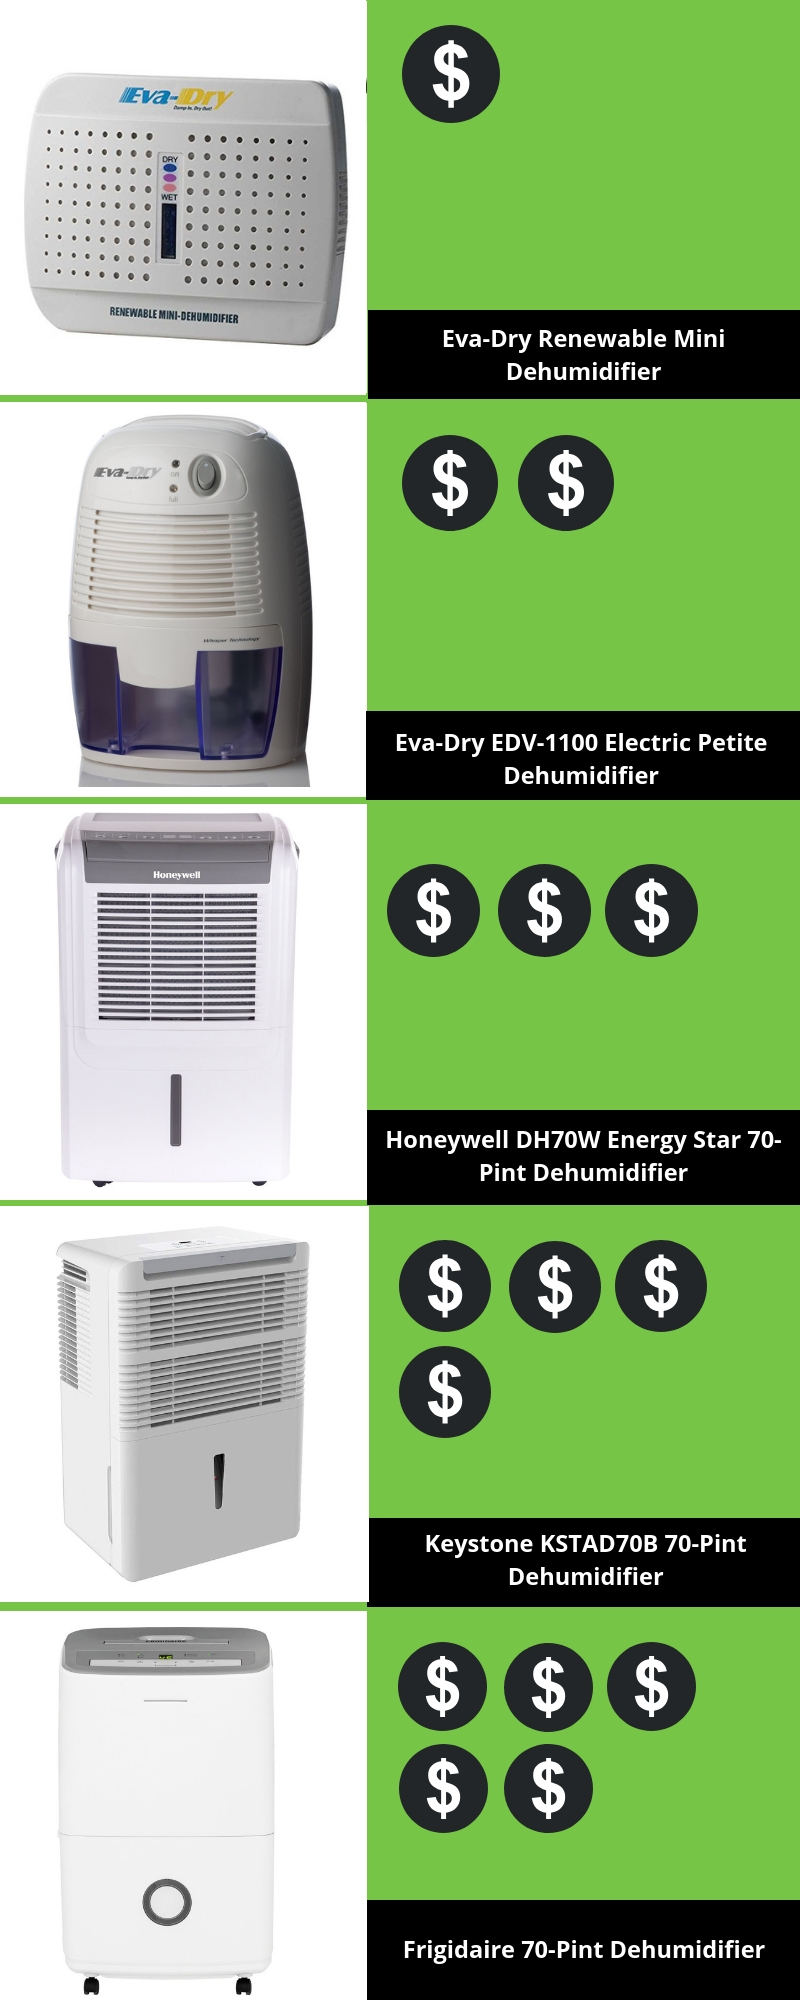 How Much Do Dehumidifiers Cost - WITH TEXT